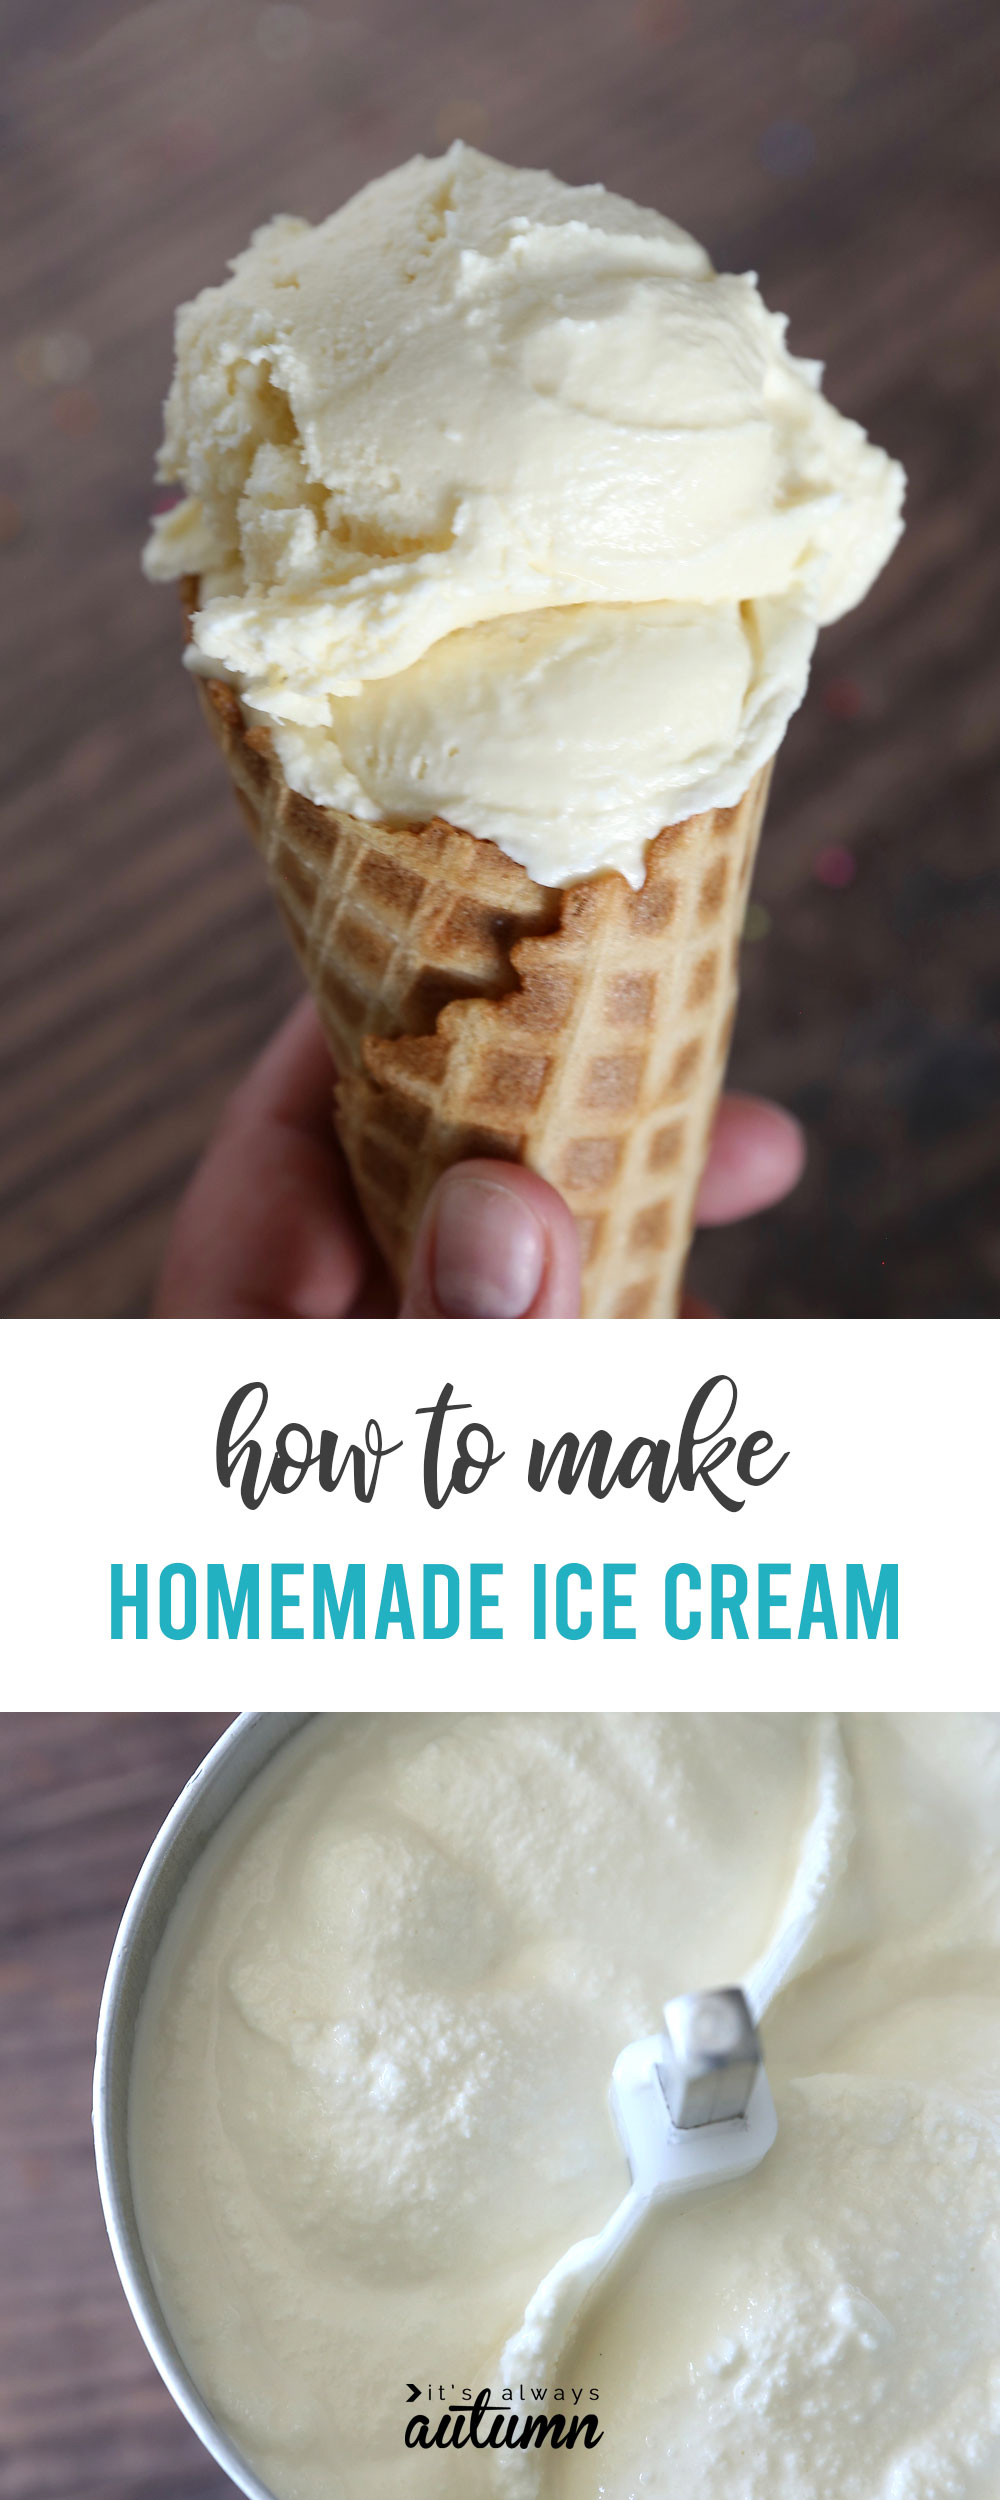 How to make homemade ice cream + step by step video - It's ...
